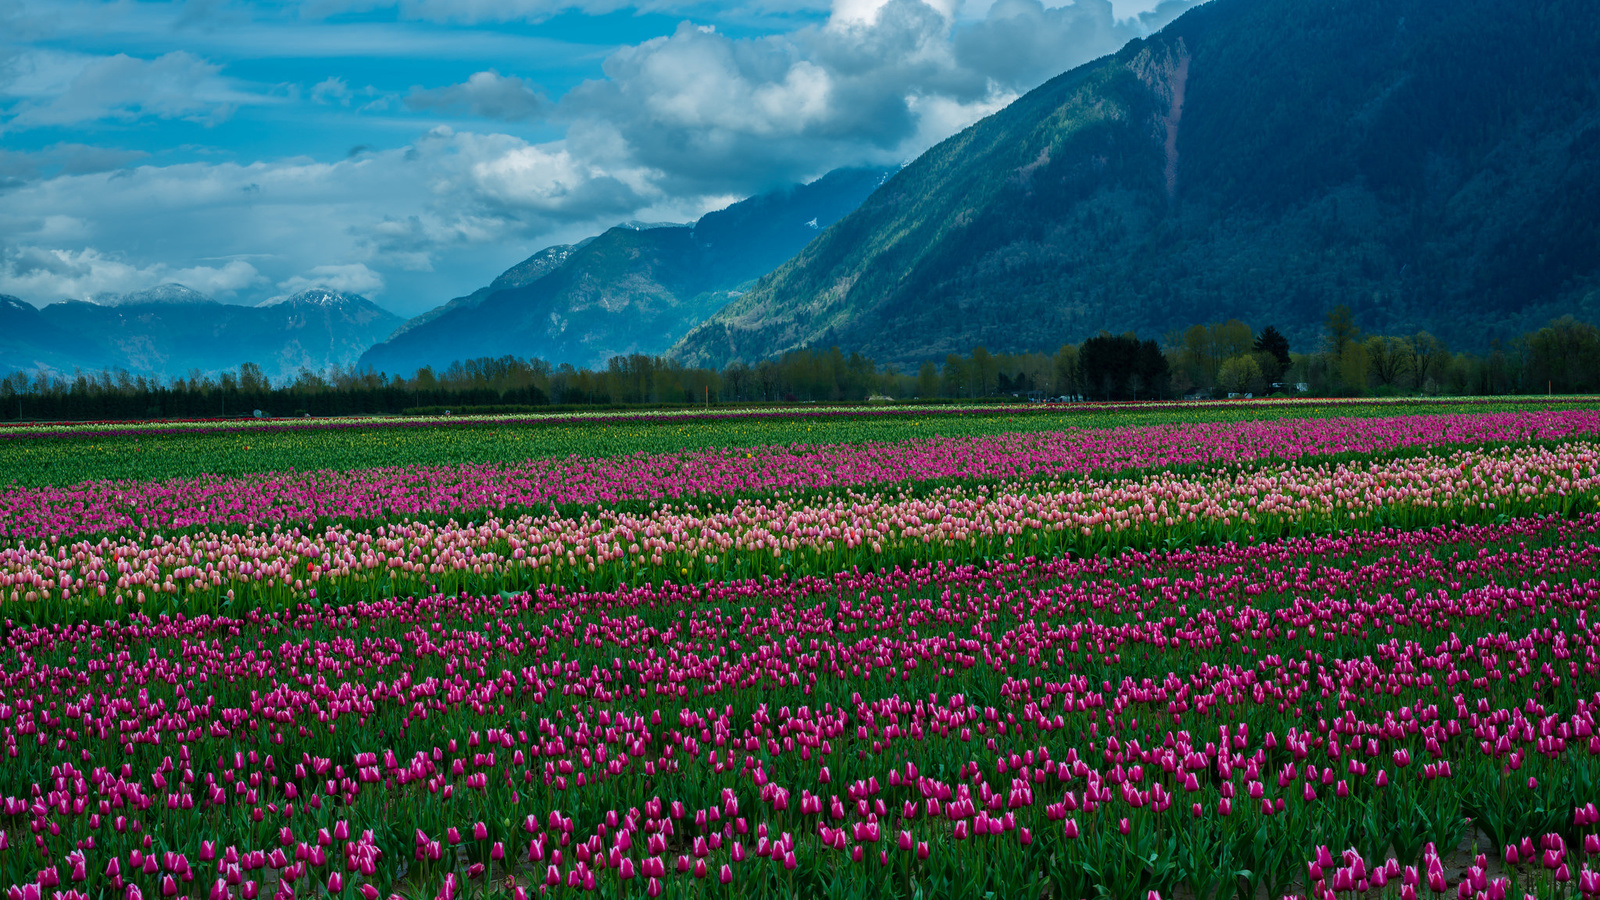 , , , , , , , , nature, landscape, mountain, snow, clouds, the field, tulips, flowers